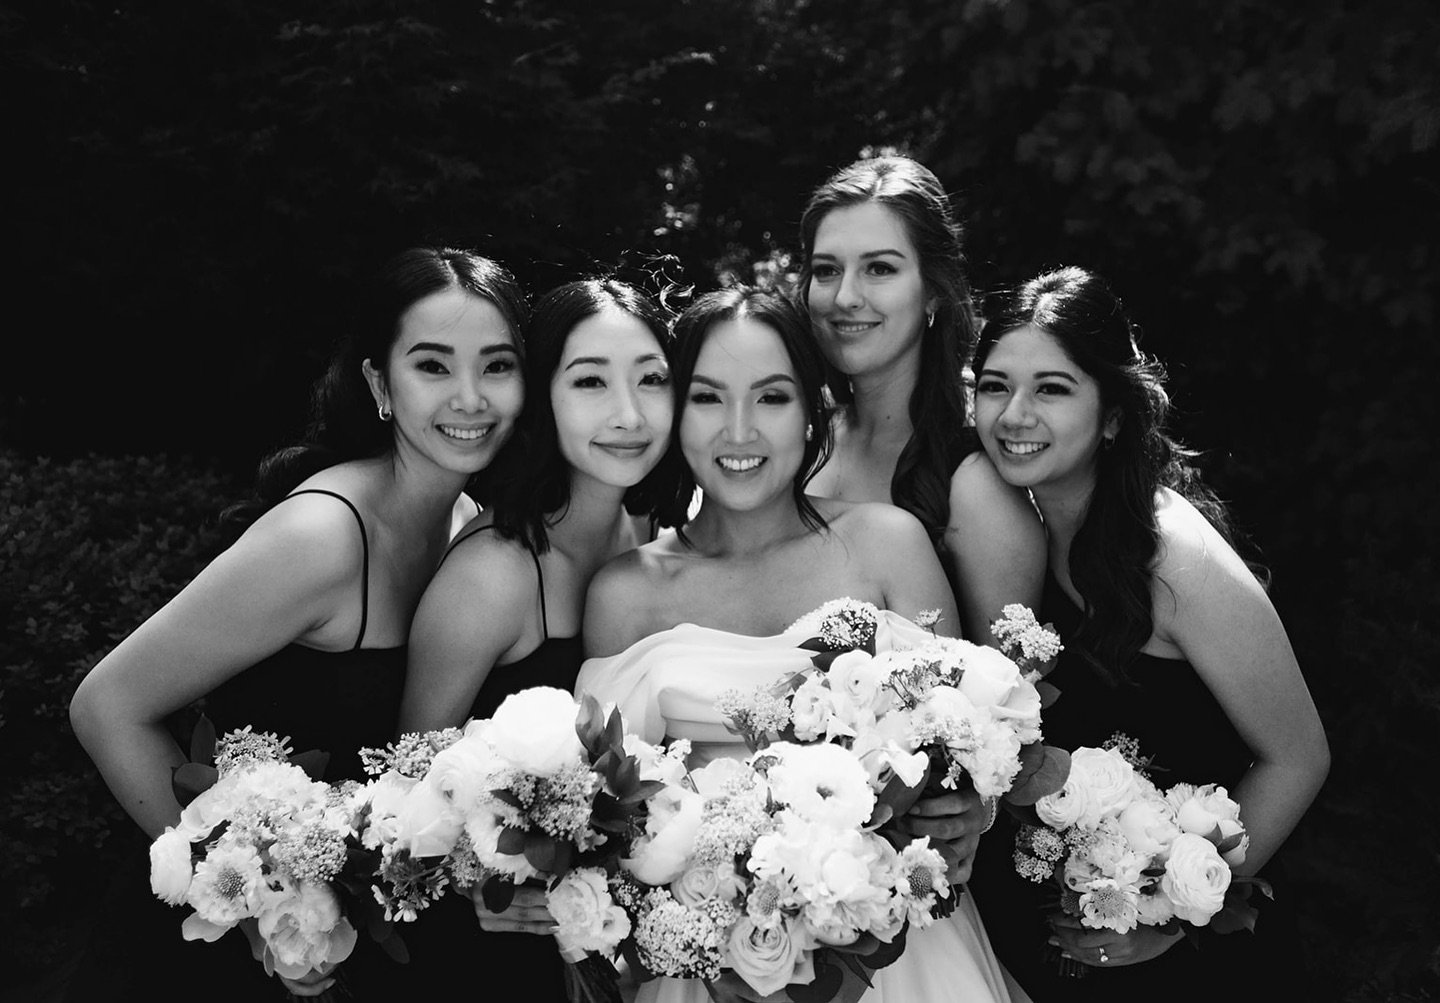 Happy International Women&lsquo;s Day! ❤️
To all the amazing individuals who stand by us, support us, and lift us up❤️

Wedding planner @eternitymomentswedding
Photography @jon.tieh 
Floral &amp; Decor @infinityeventdesign
@peoniesfineflowers 
DJ @de